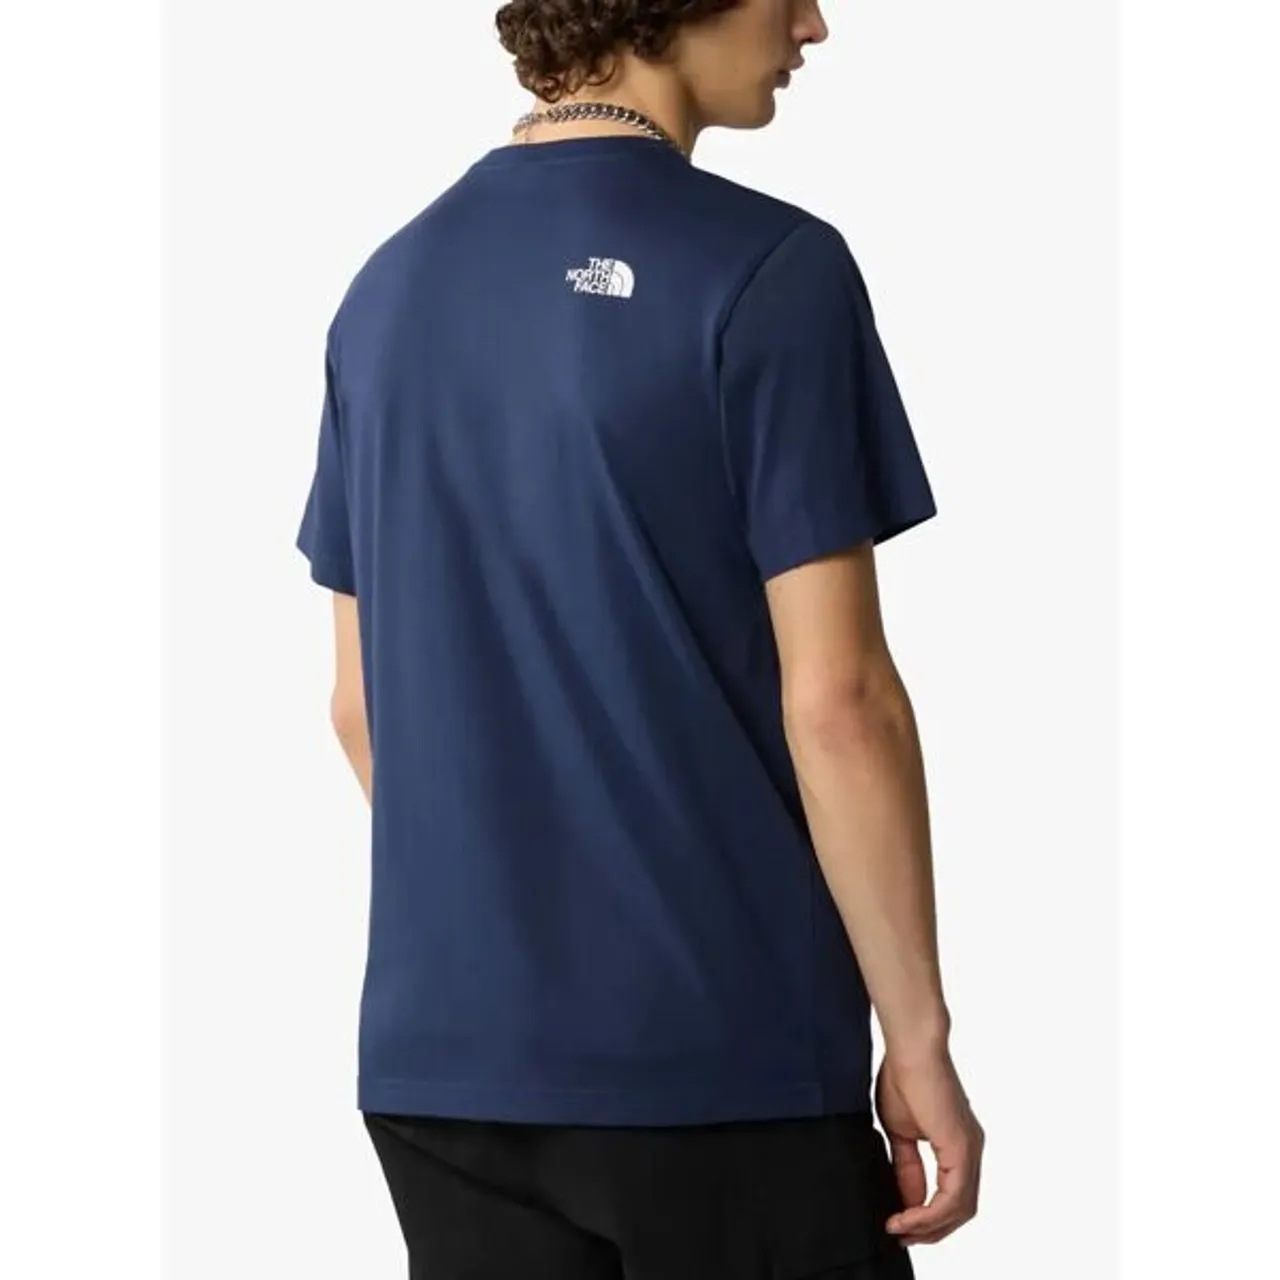 The North Face Short Sleeve Dome T-Shirt, Navy - Navy - Male